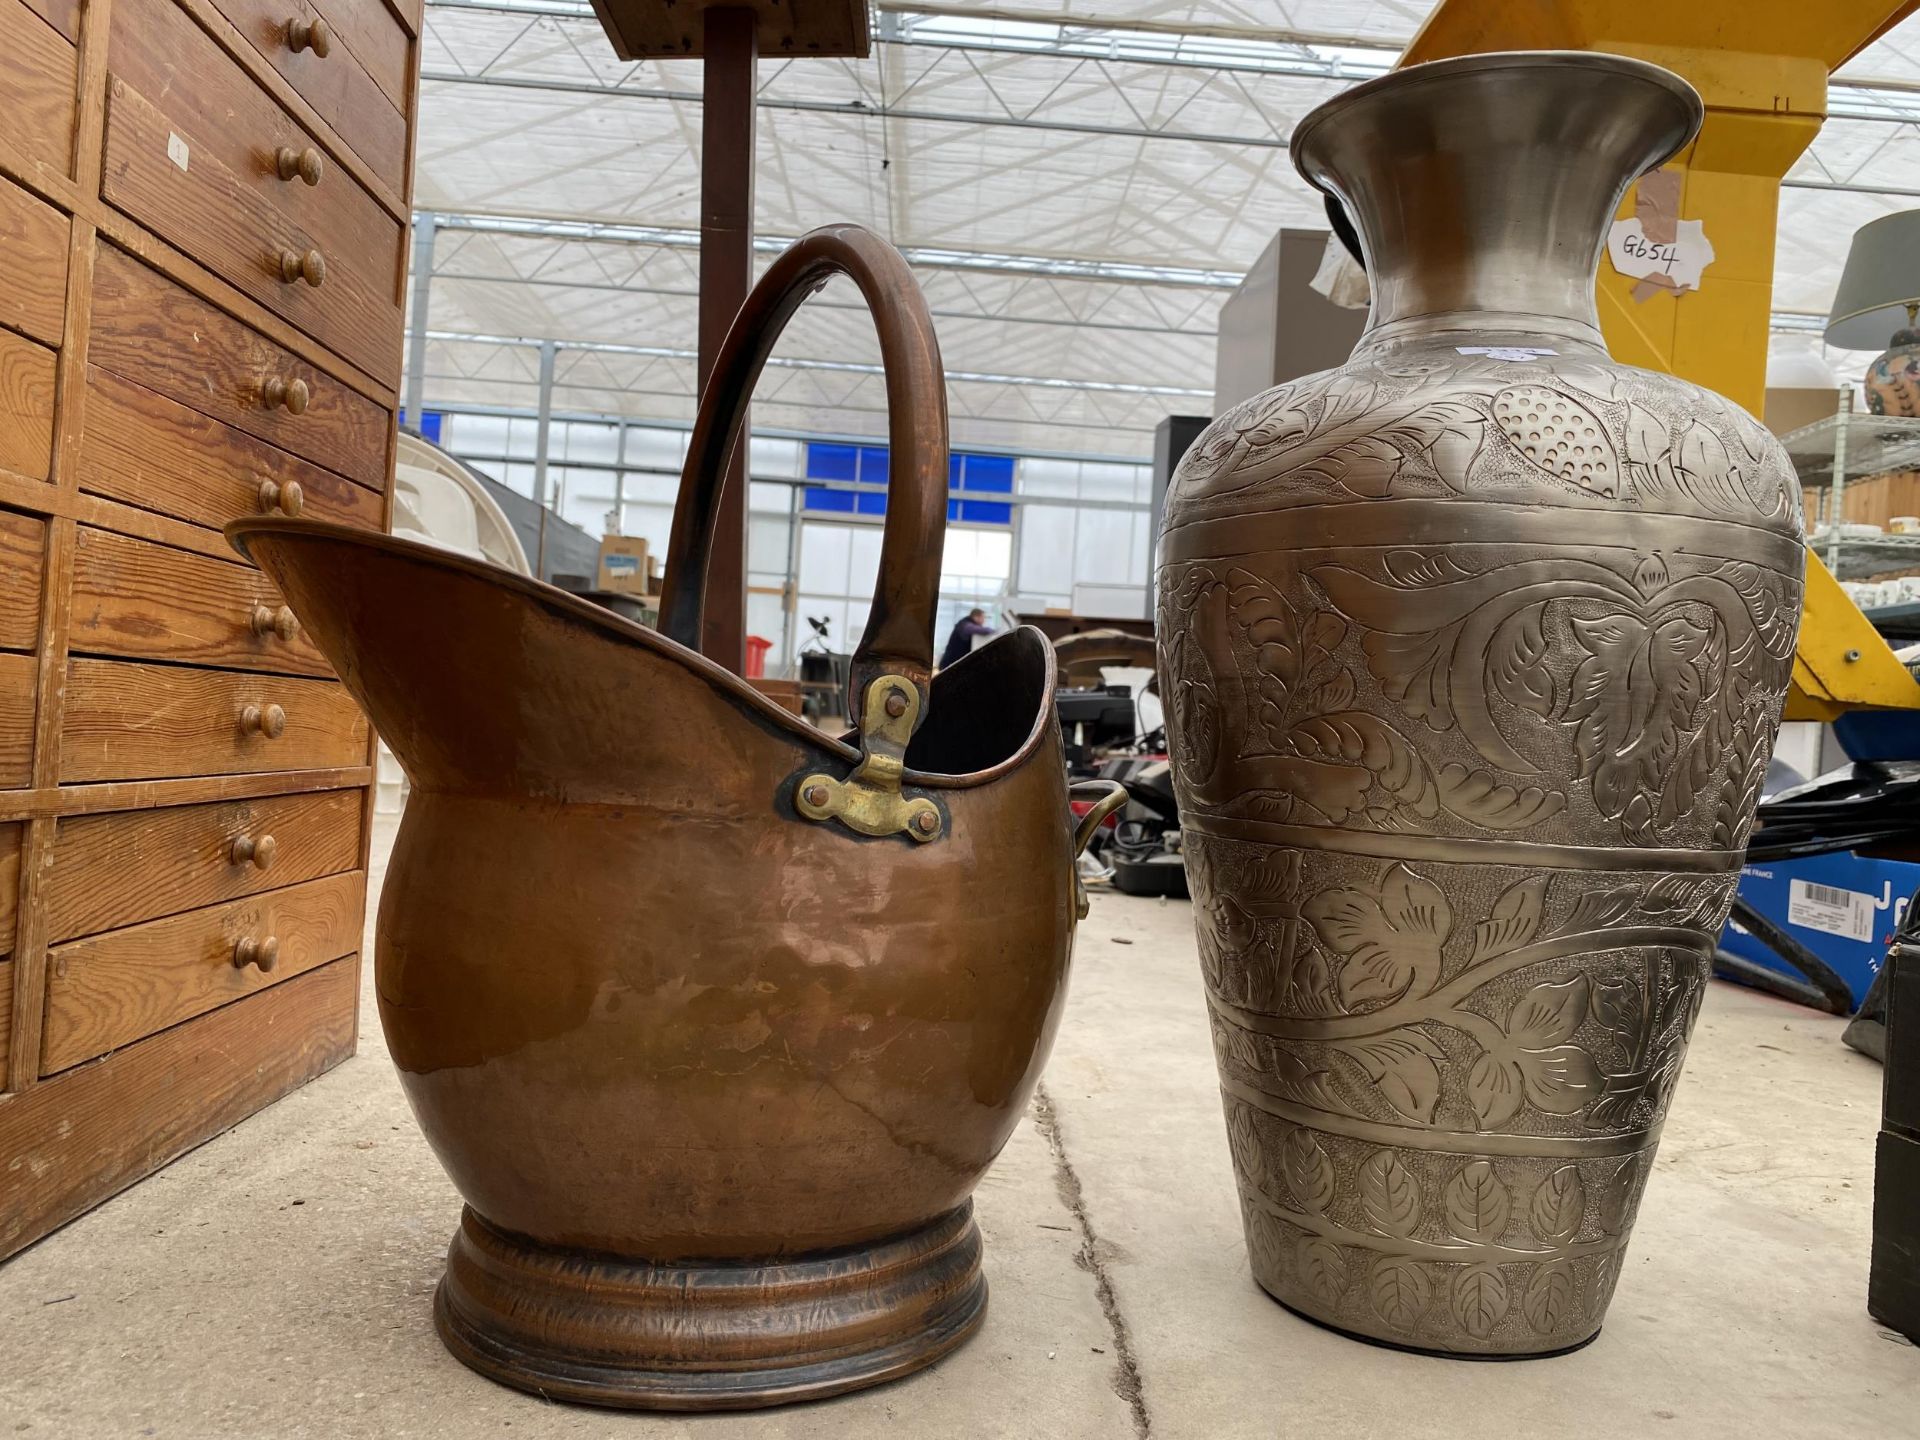 A LARGE COPPER COAL BUCKET AND A LARGE METAL VASE - Image 2 of 4